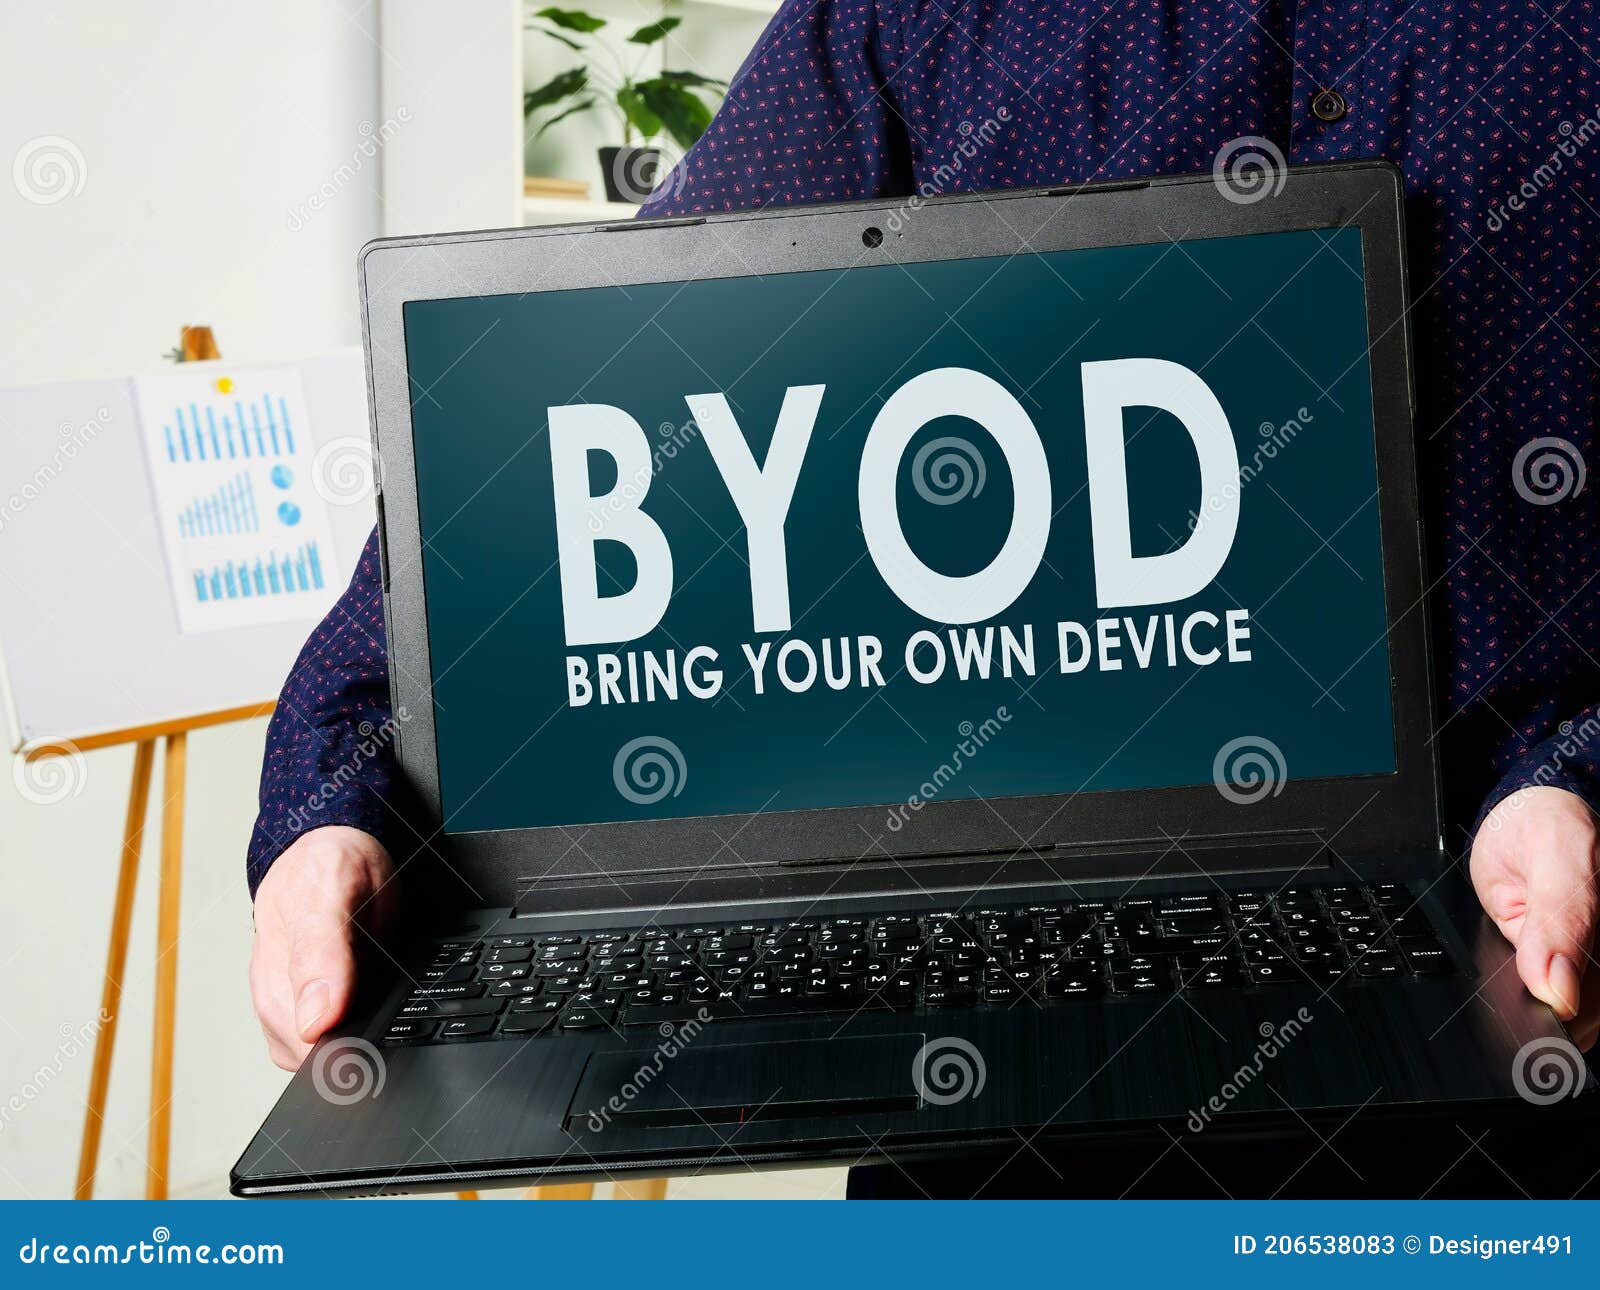 byod bring your own device. man holds a laptop in his hands.